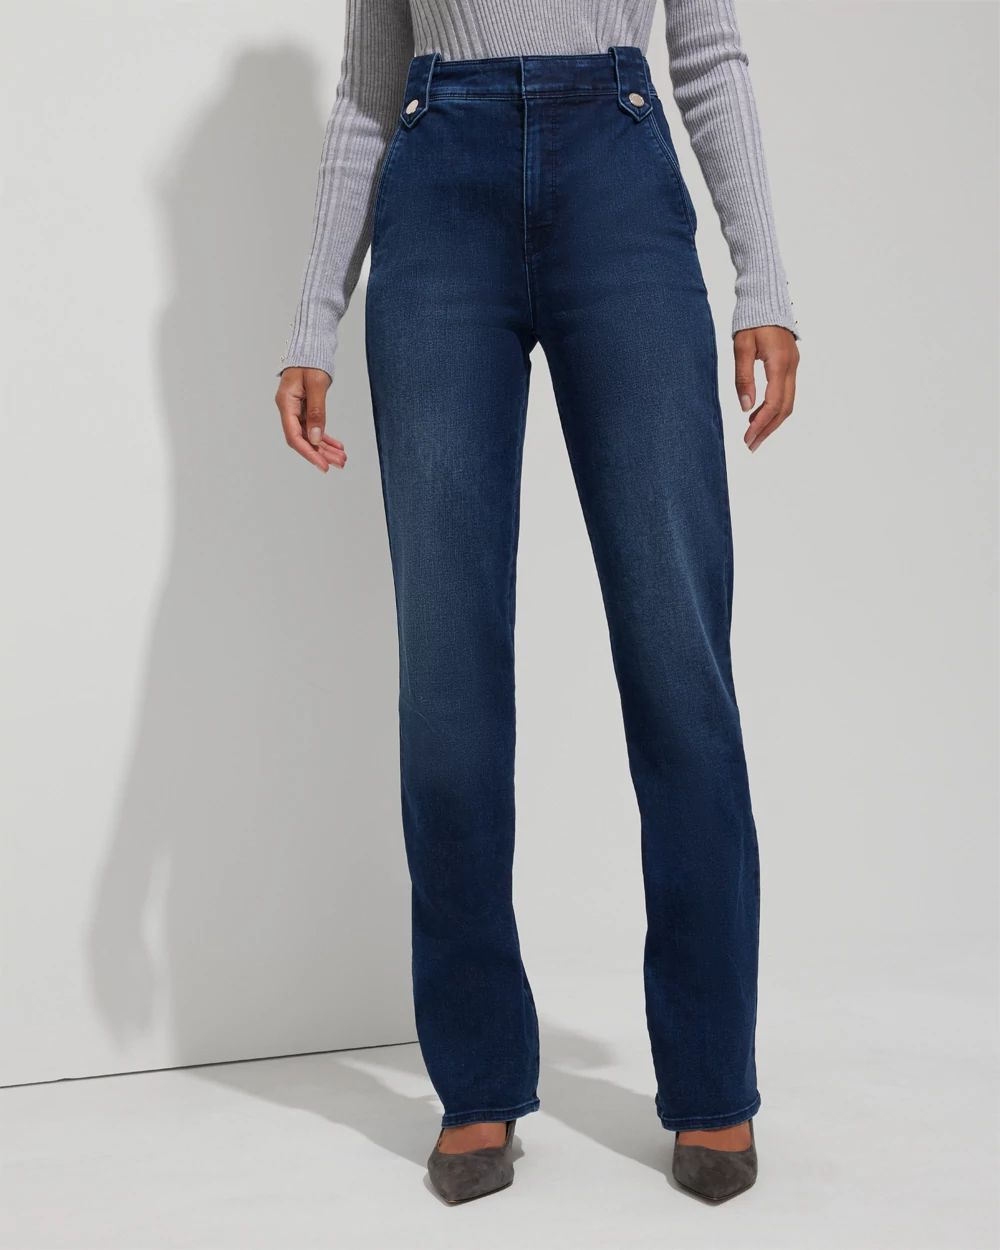 Outlet WHBM XHR Denim Trouser With Tab